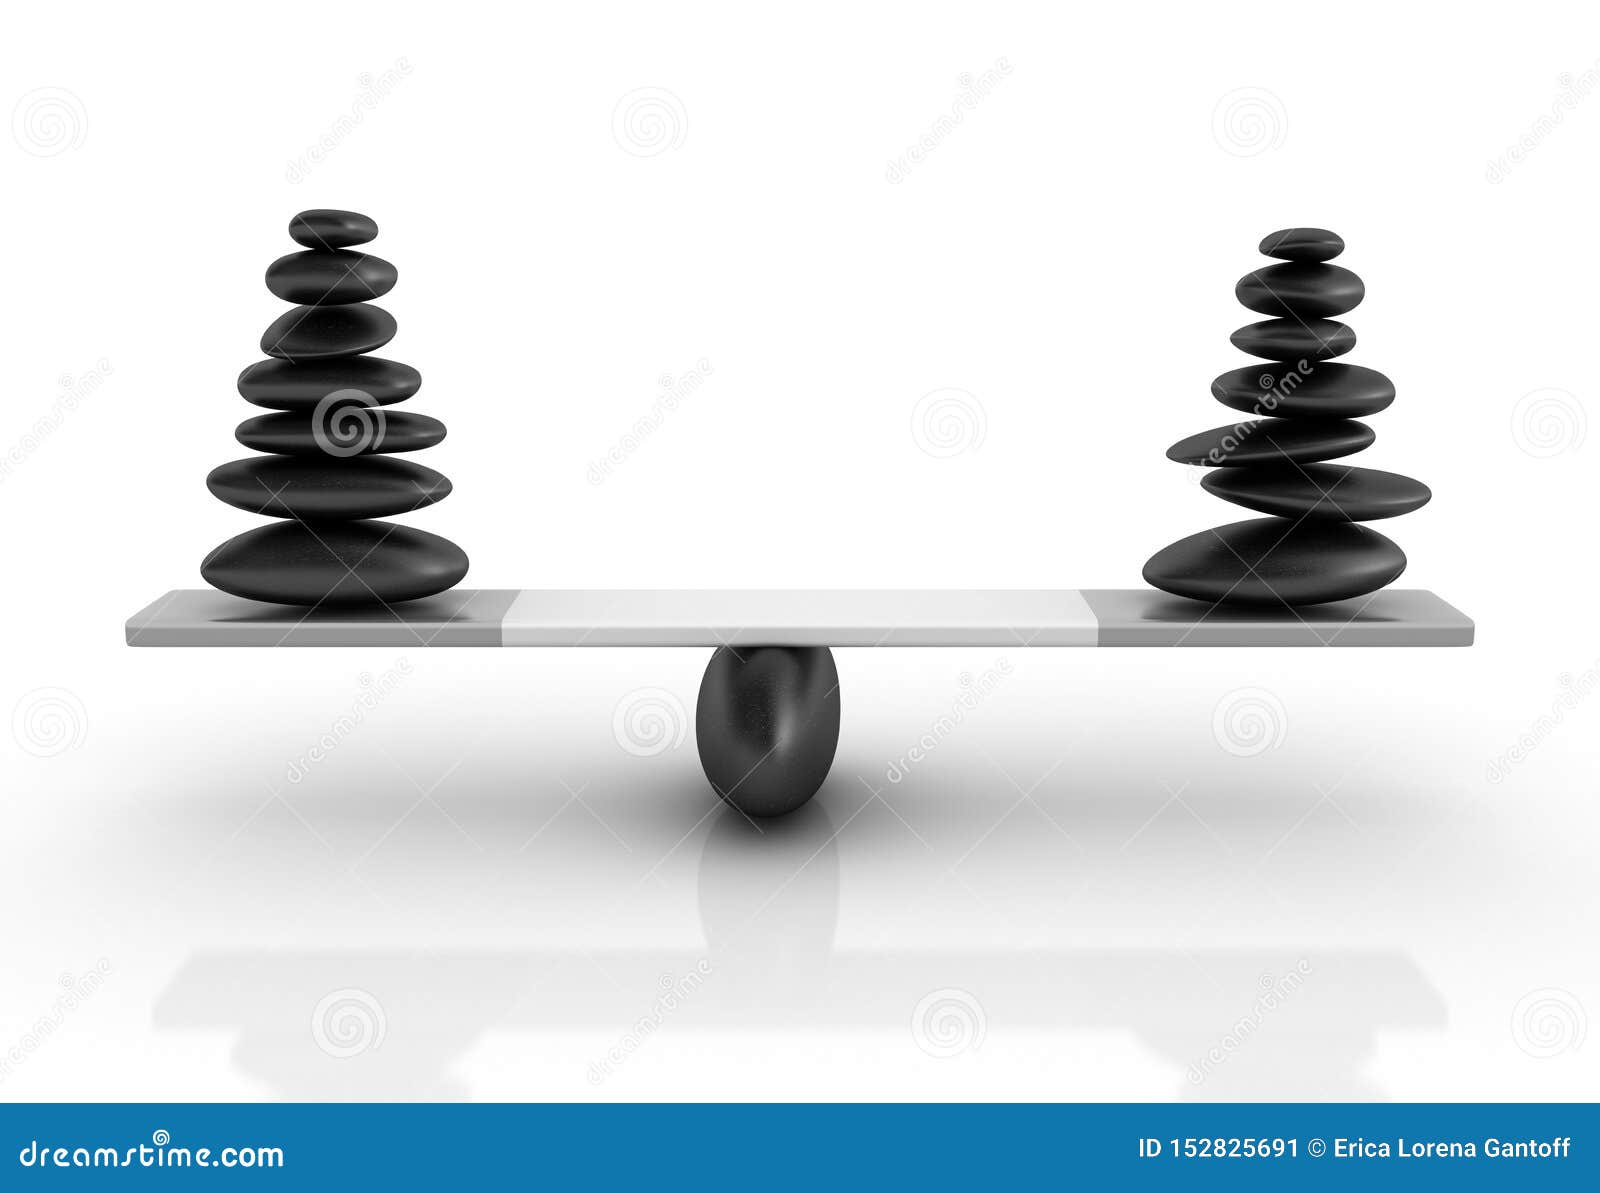 stones balancing on a seesaw